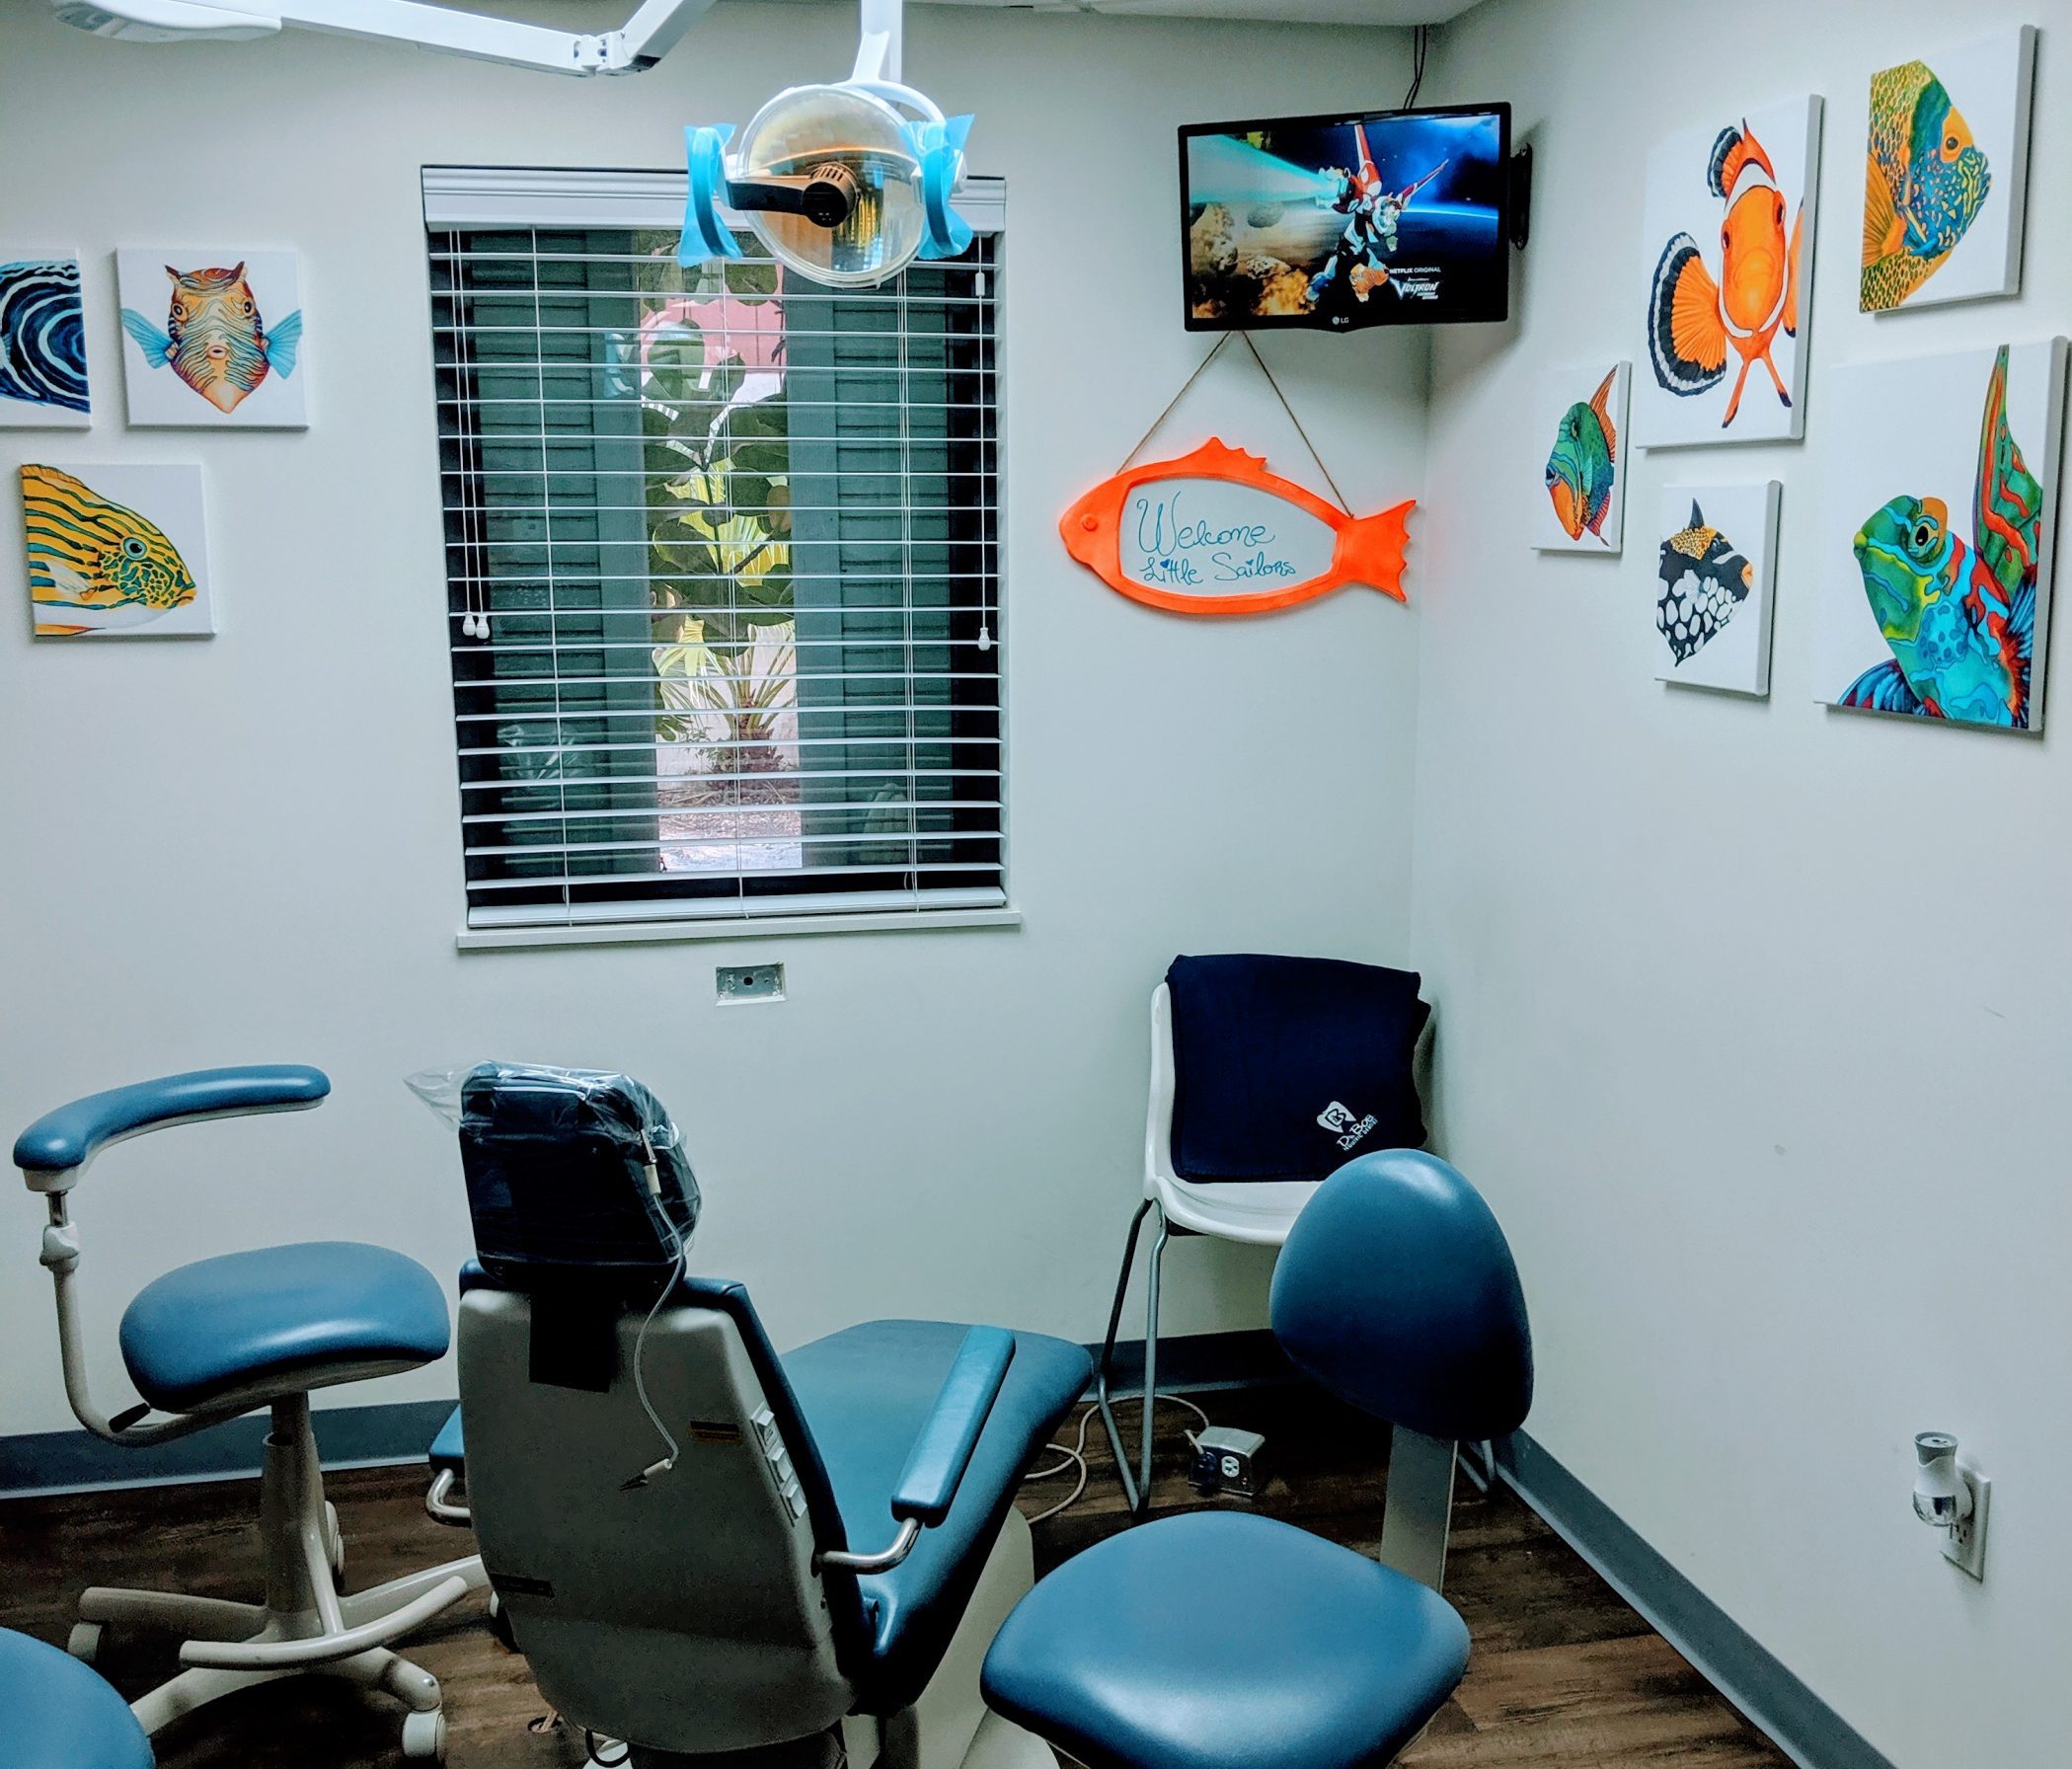 A young girl at the dentist's office (Going Back to the Dentist? 3 Things to Consider | Dr. Bob Pediatric Dentist Lynda Lantz Contributor Miami Mom Collective)